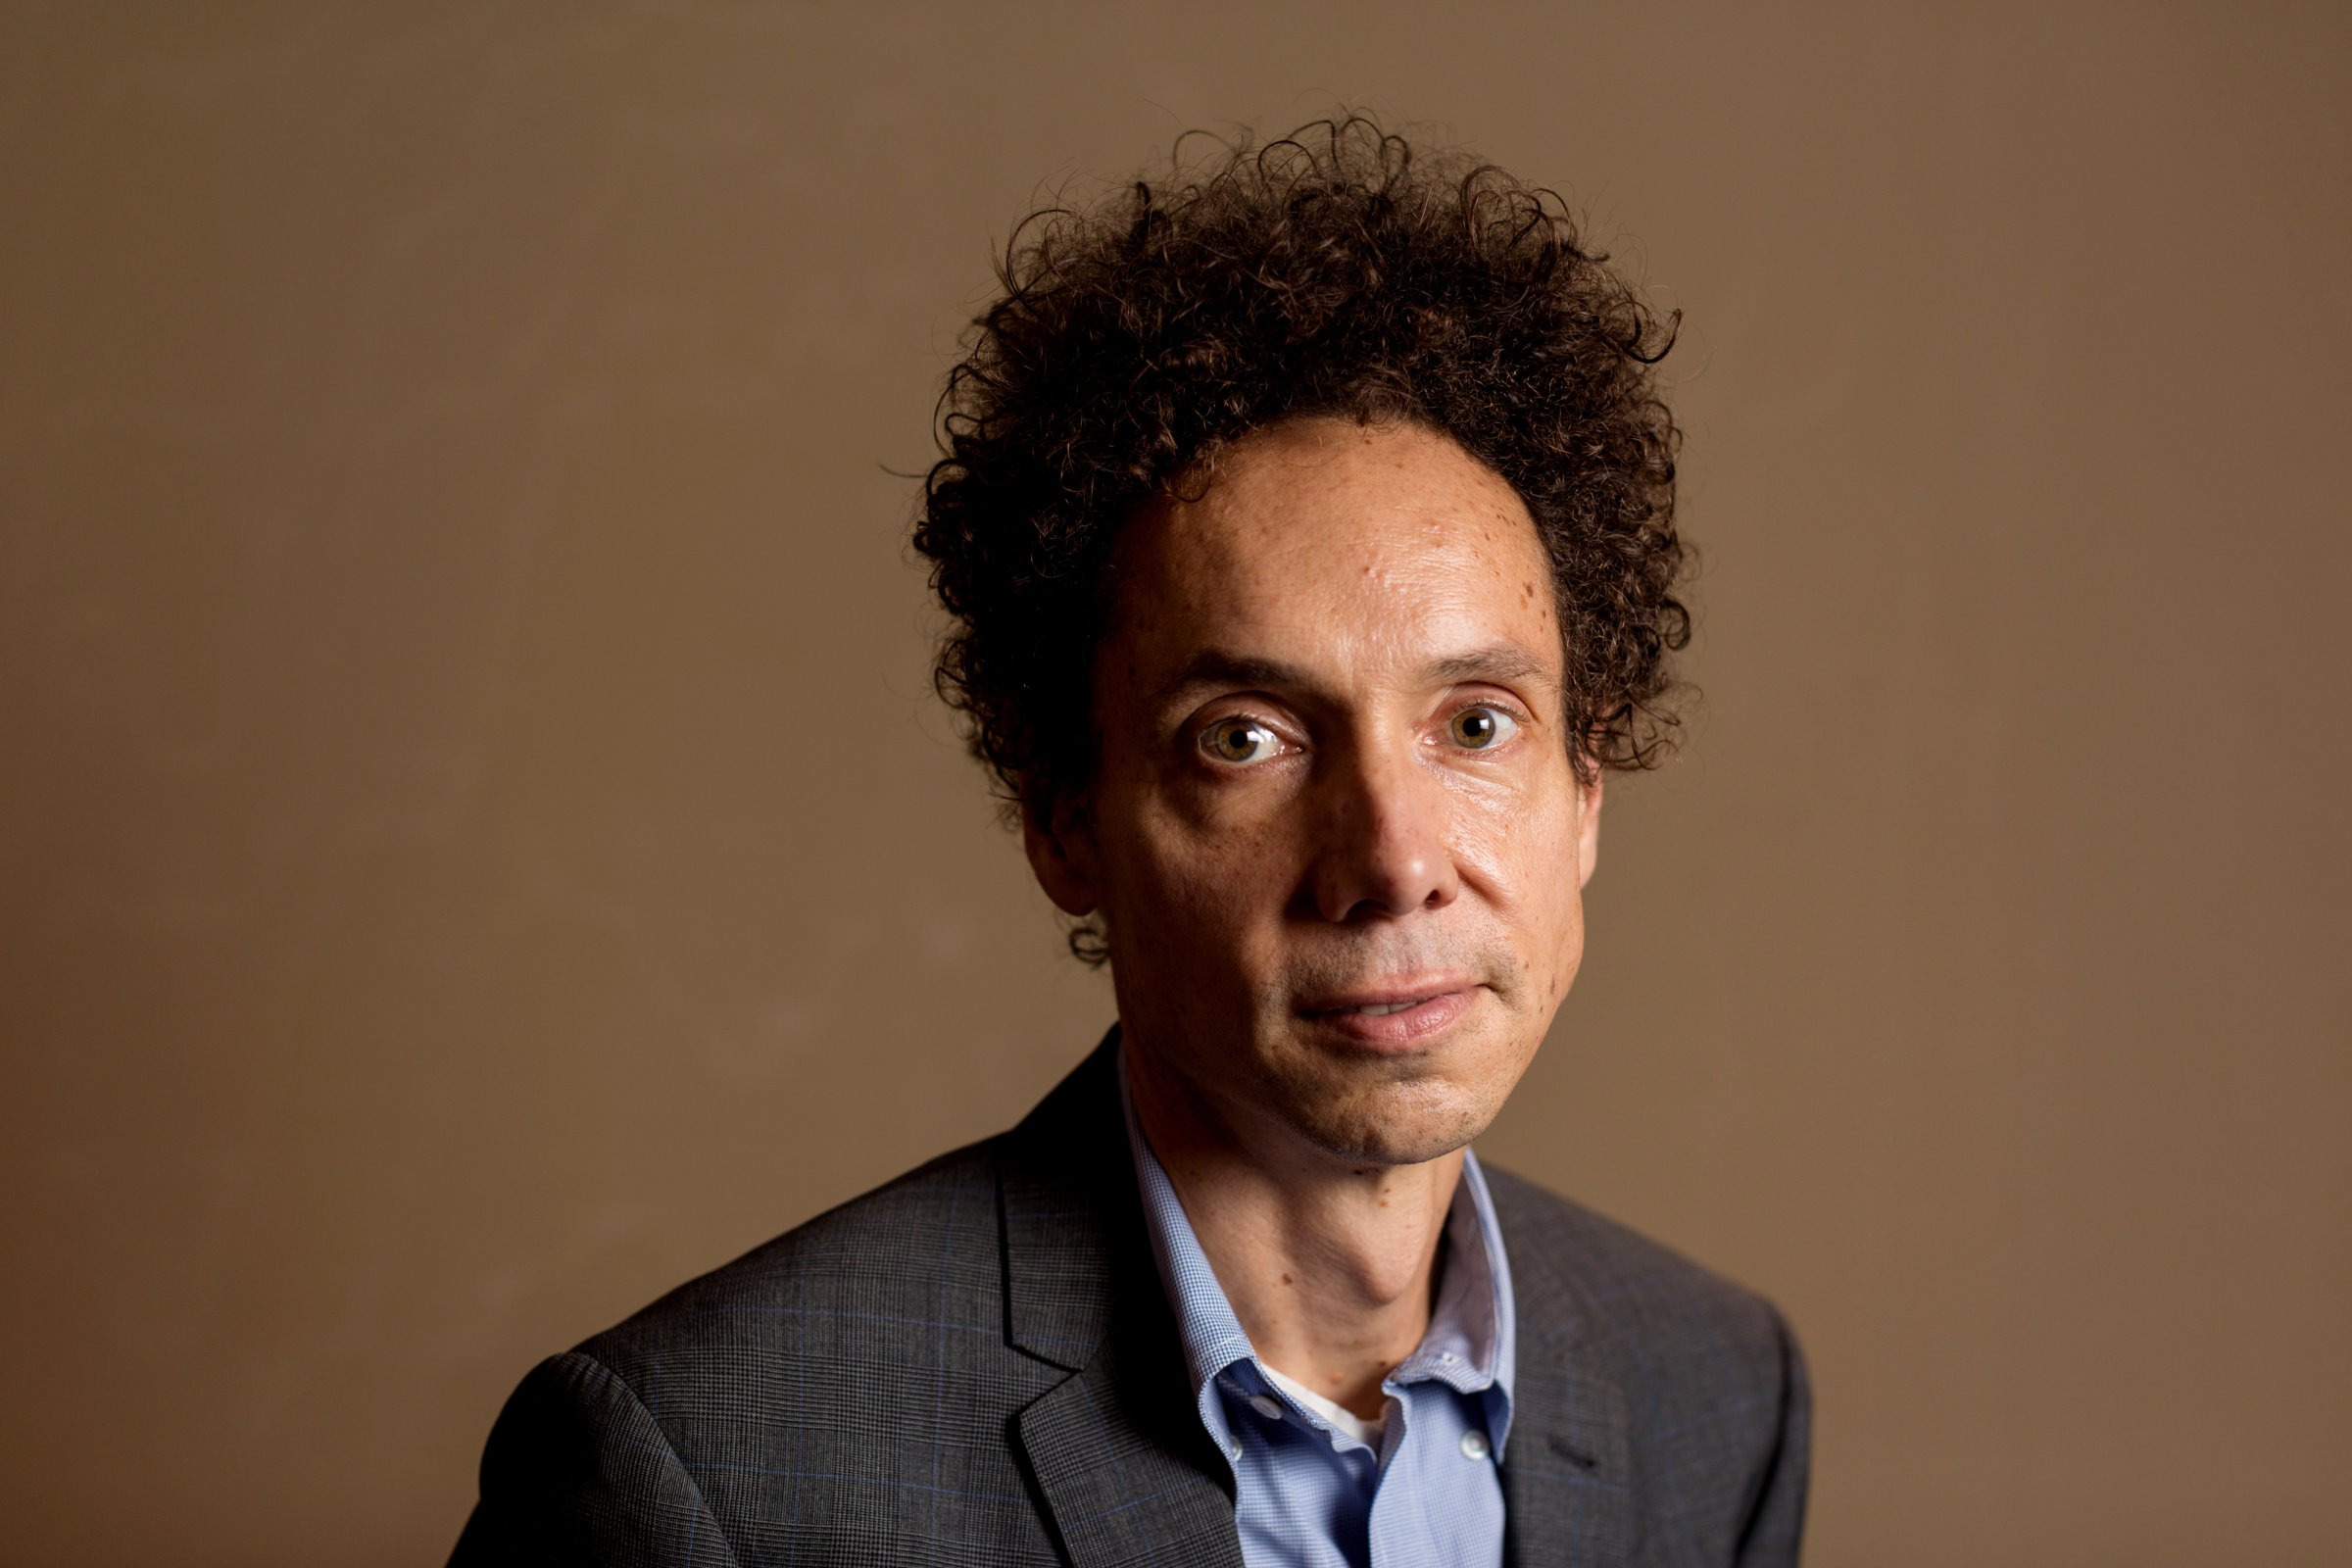 Malcolm Gladwell at the Barclays Asia Forum in Hong Kong on Nov. 6, 2014.